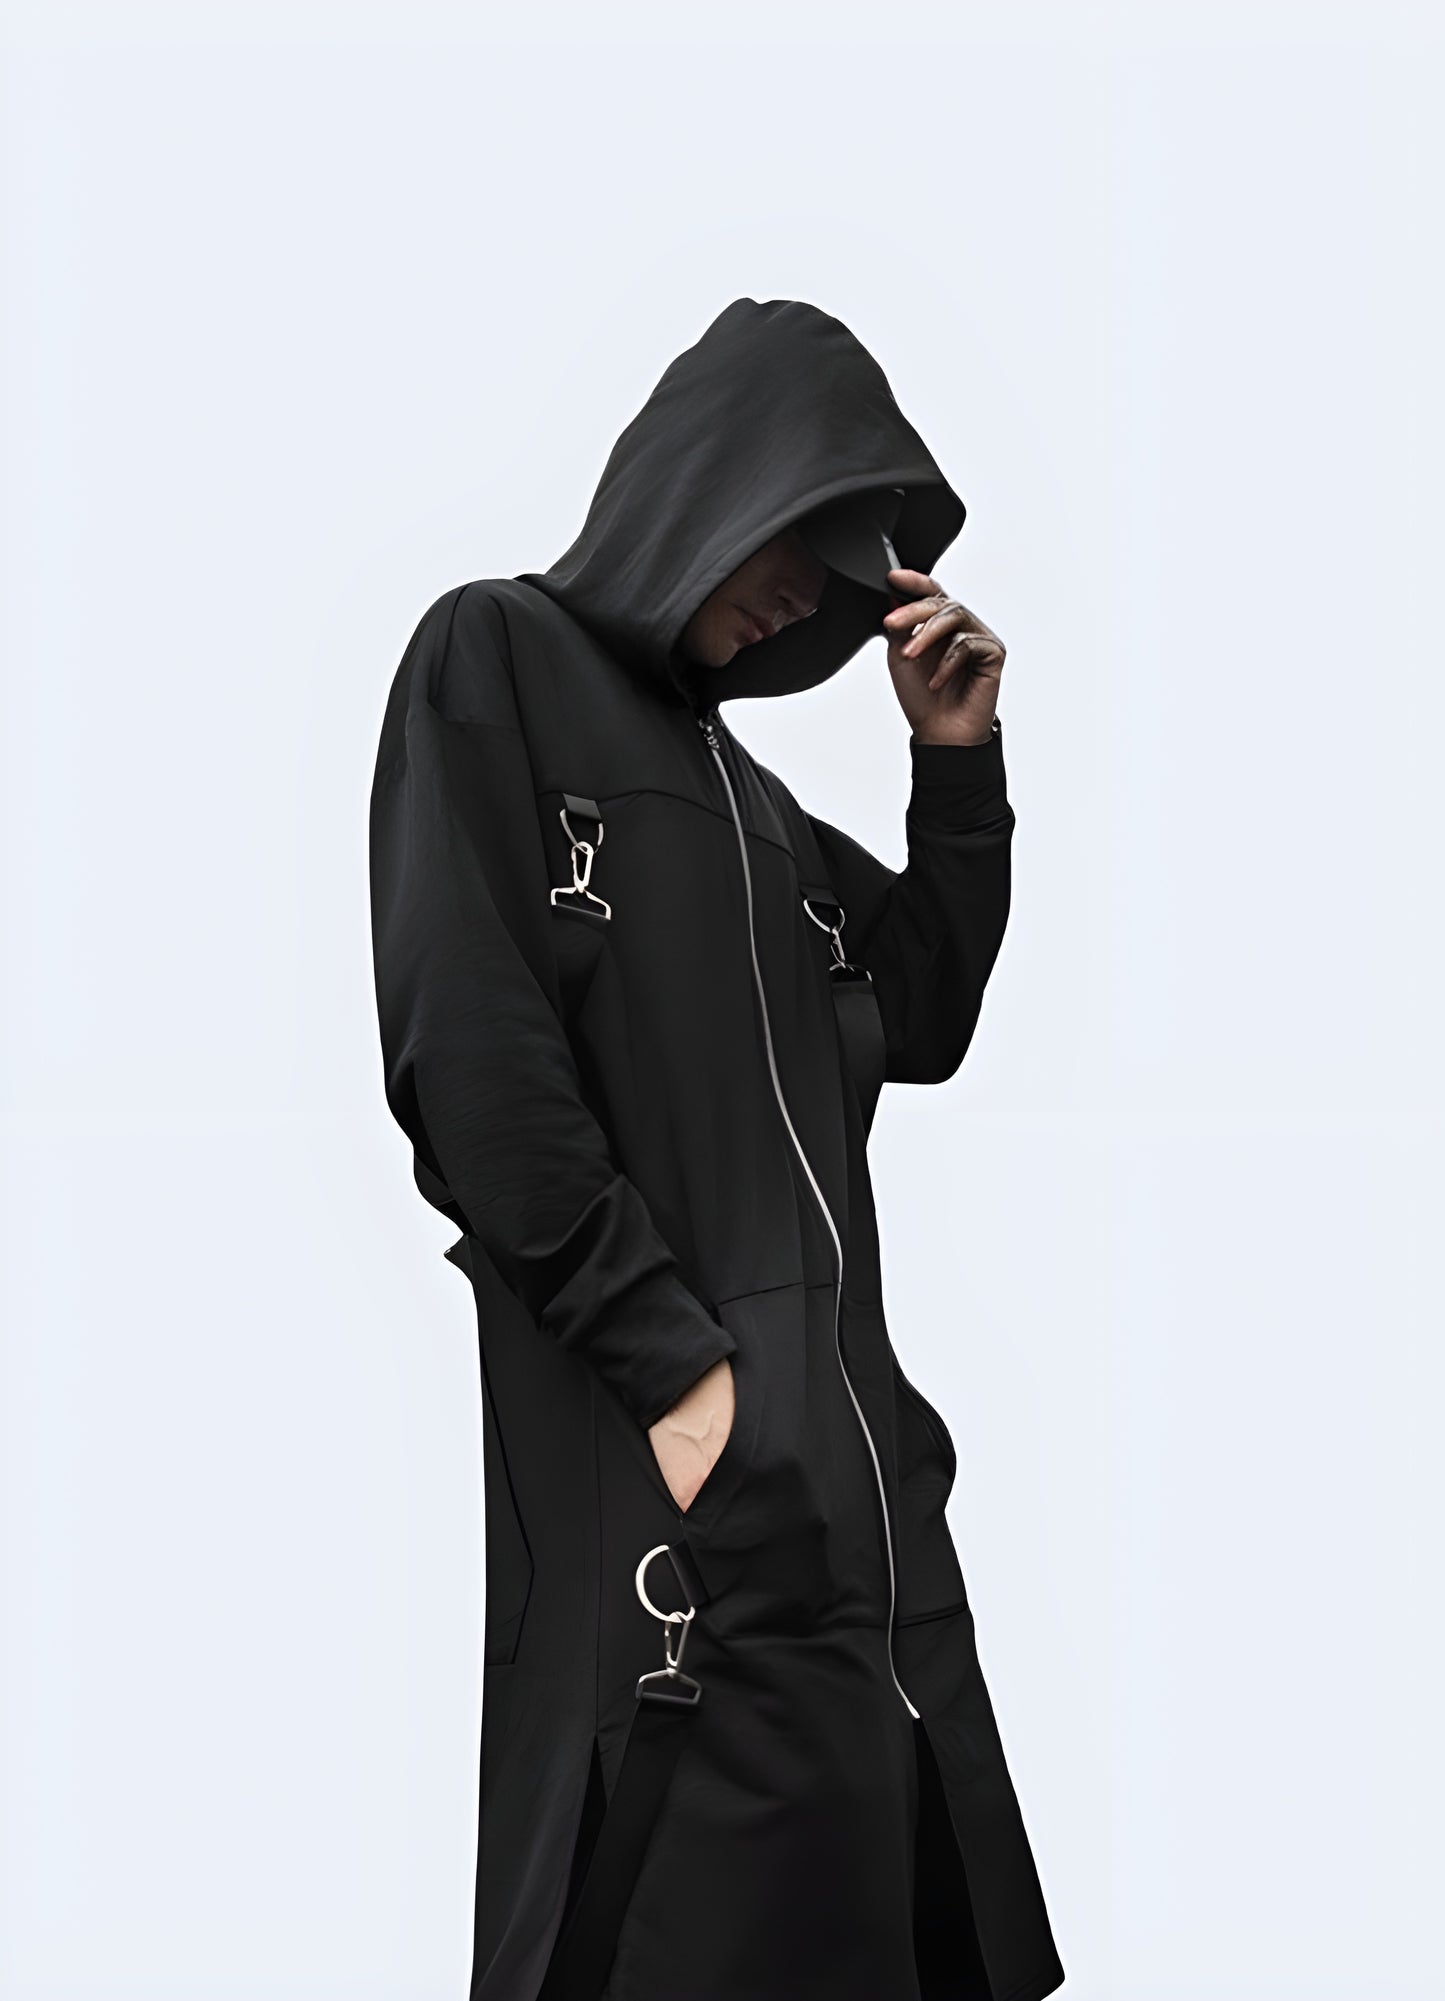 This oversized hooded cloak is designed to make a statement.